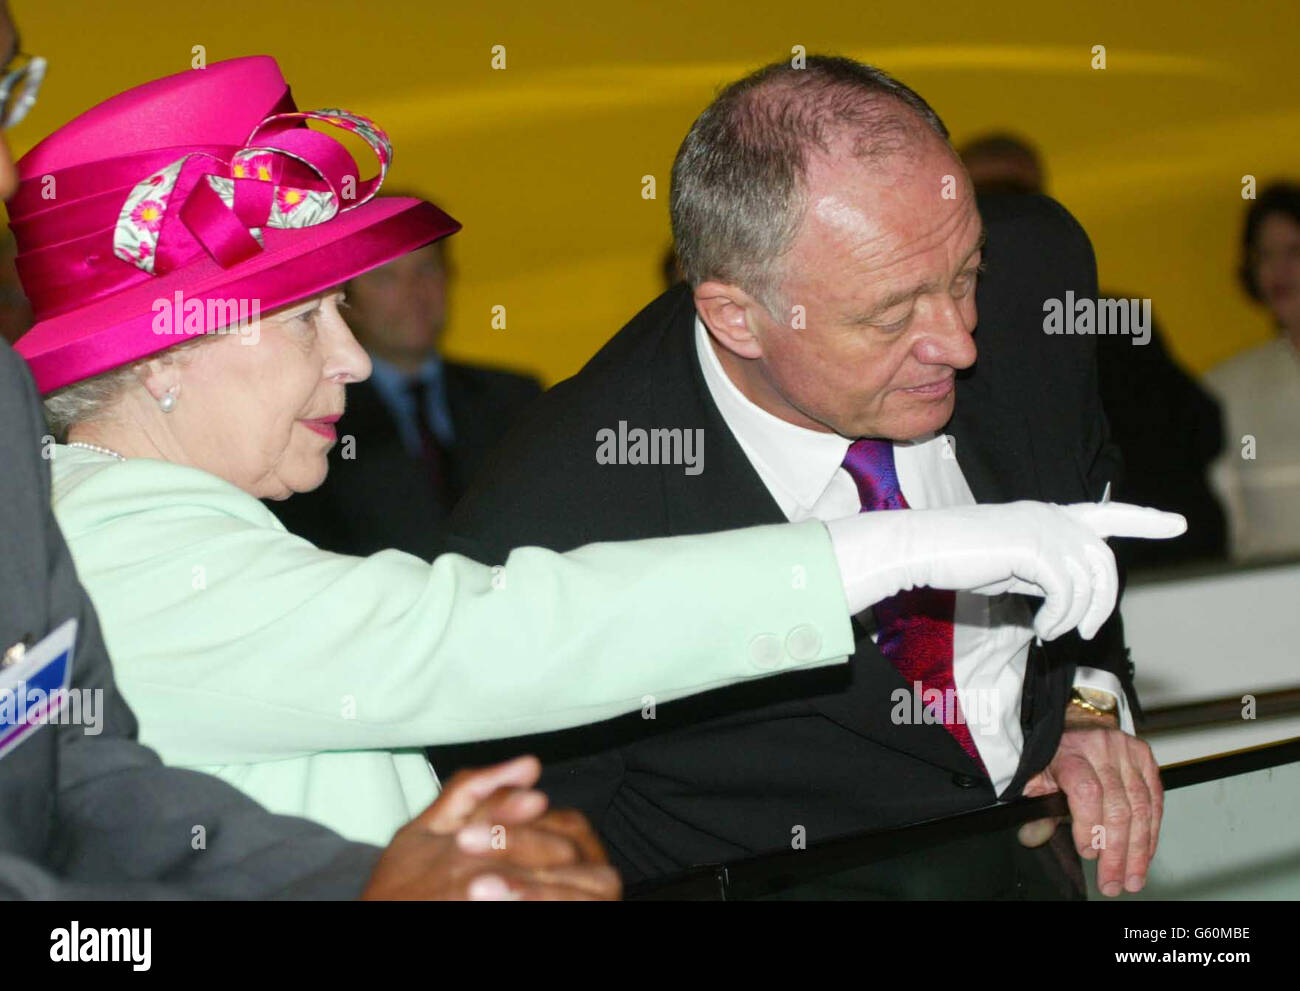 London's Mayor Ken Livingstone (right) with Britain's Queen Elizabeth II during a visit when she formally opened City Hall, which houses the London Assembly, on the south bank of the Thames, close to Tower Bridge. *The stunning building, designed by Foster and Partners, and constructed by Arup & Partners, has an assembly chamber, committee rooms and public facilities, together with offices for the Mayor, London Assembly Members and staff of the Greater London Authority. It provides 185,000 sq ft (gross) of space onten levels that can accommodate 440 staff and members. Stock Photo